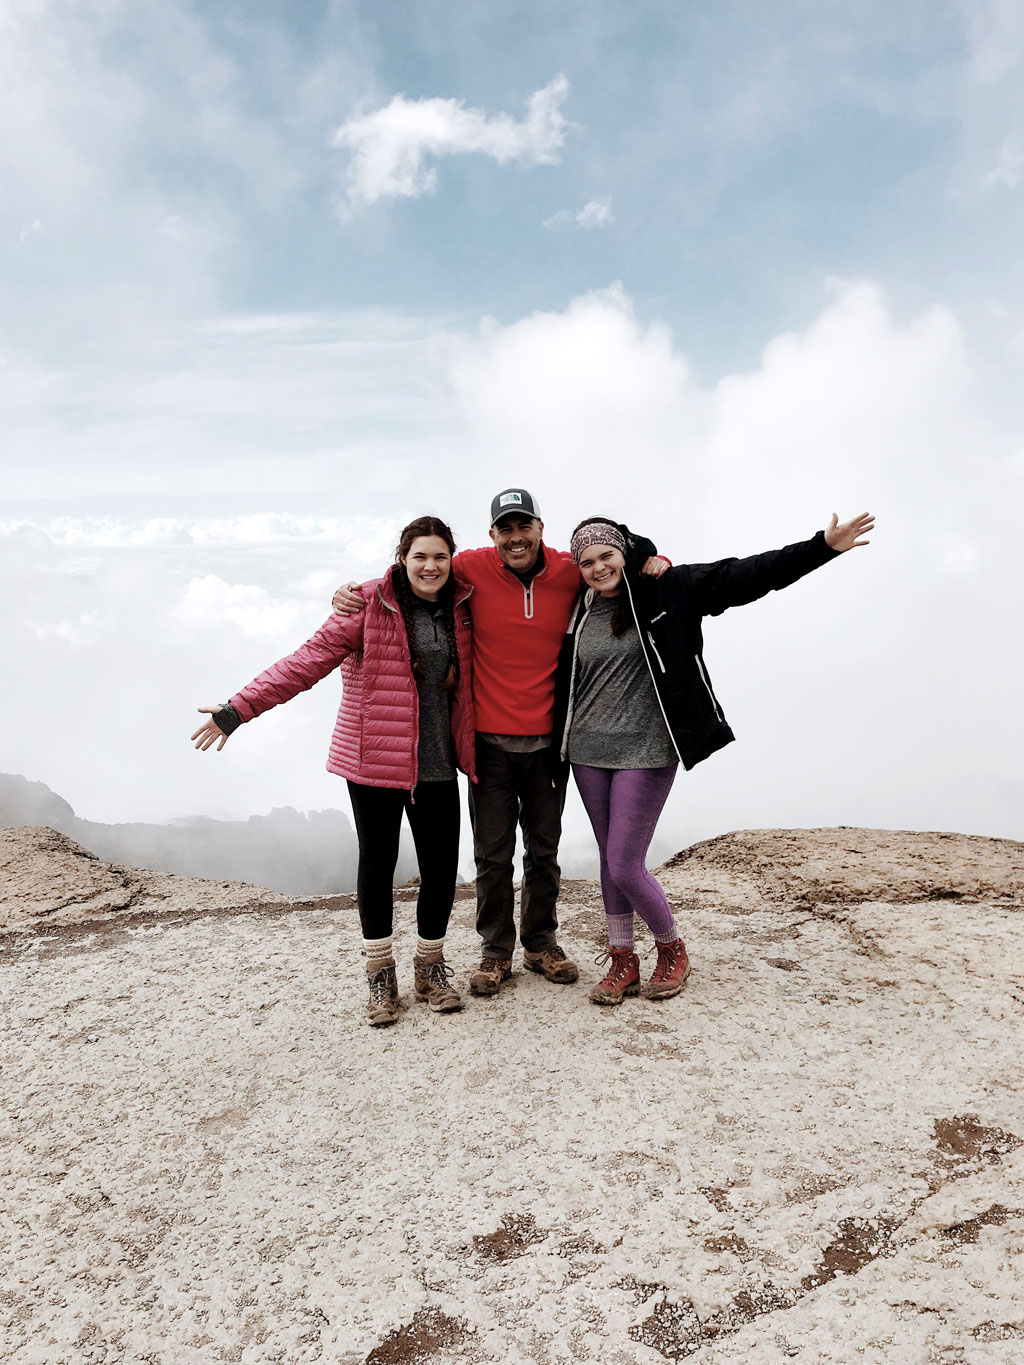 
GCCISD principal and 2 daughters on top of mountain
